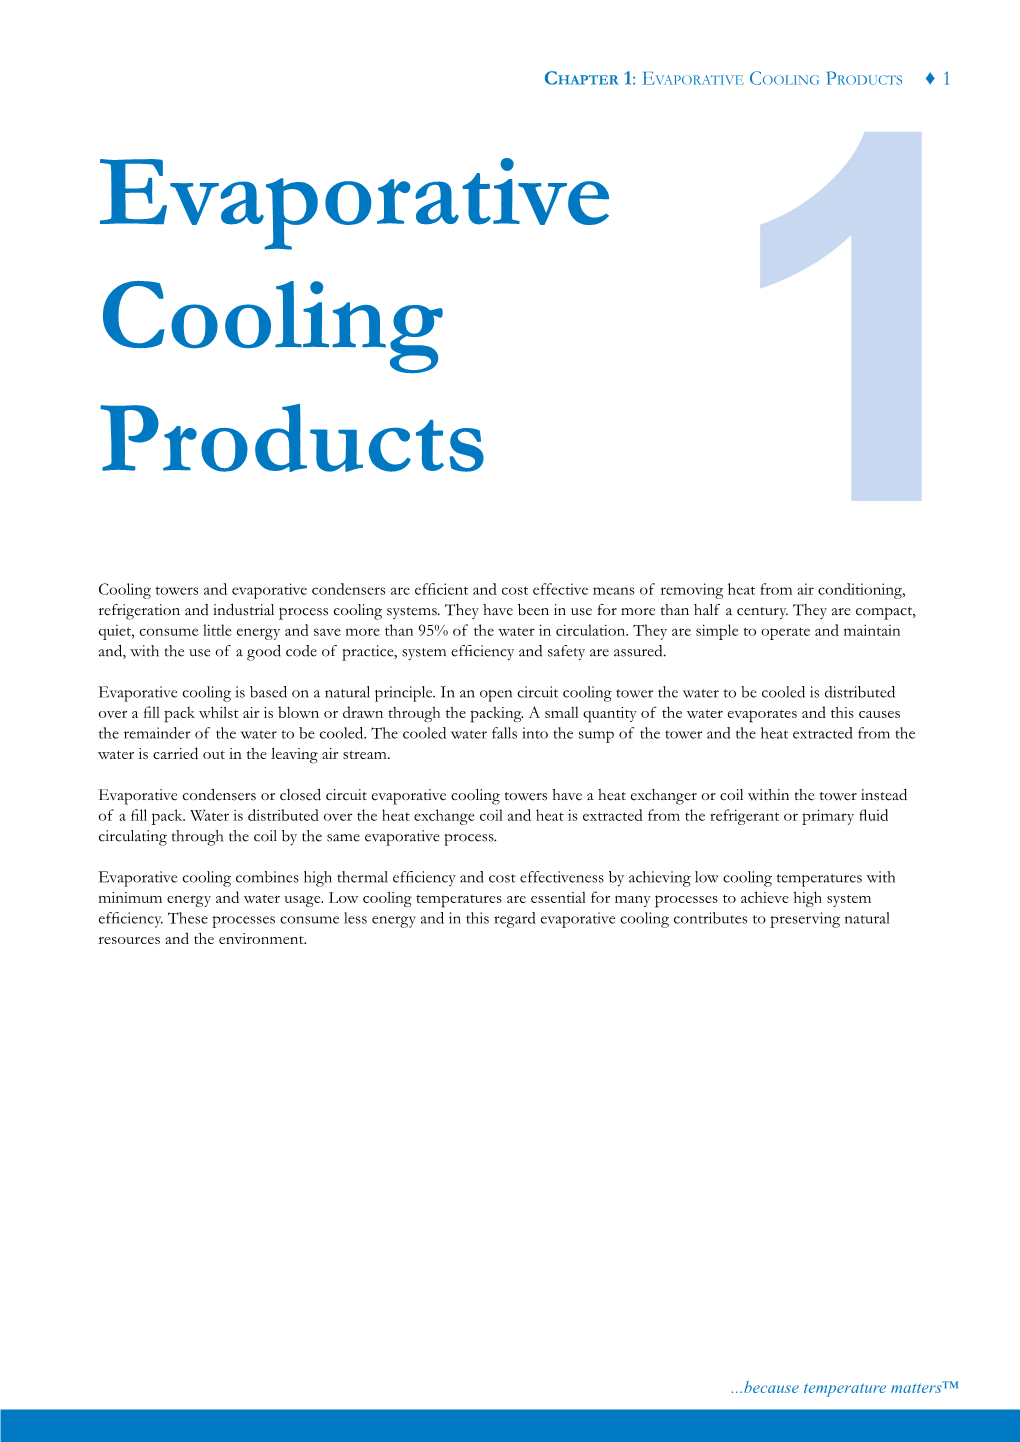 Evaporative Cooling Products ♦ 1 Evaporative Cooling Products